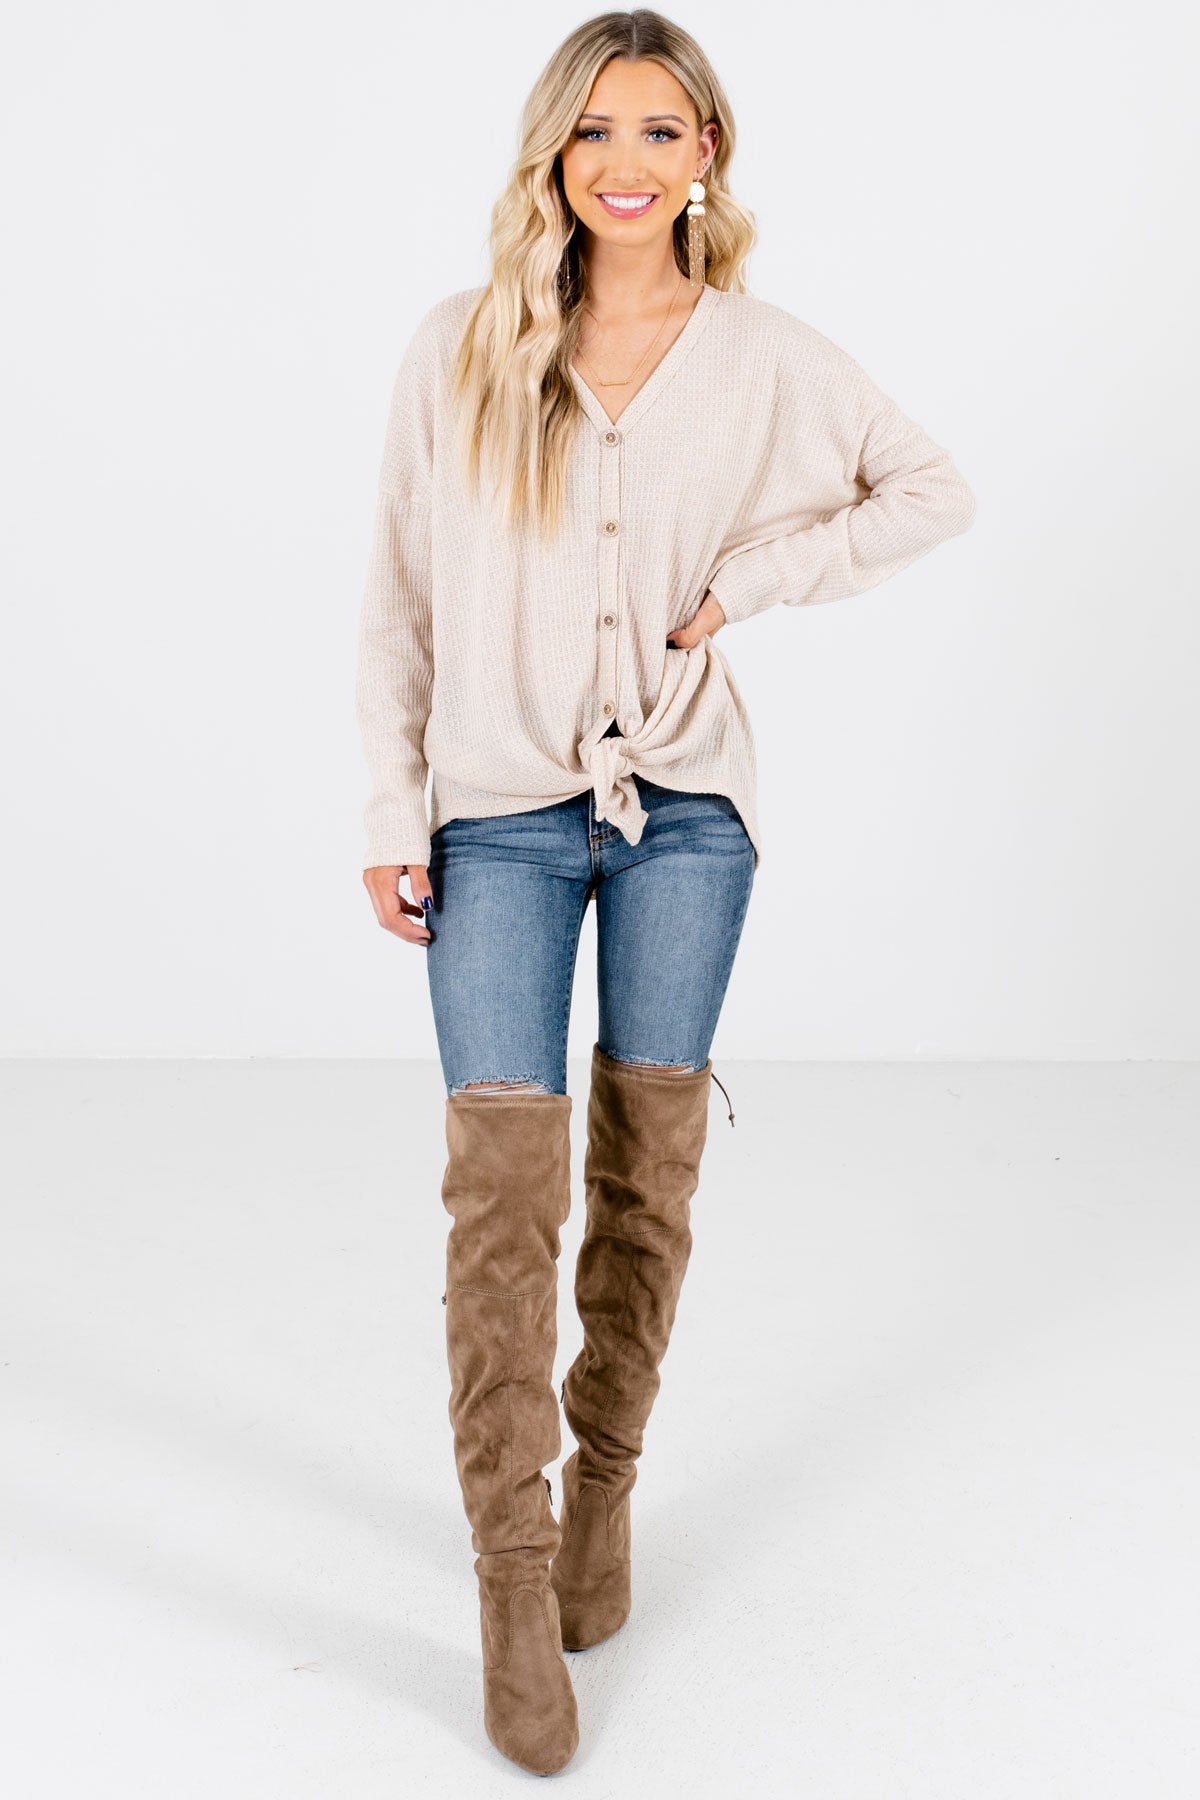 Women's Beige Fall and Winter Boutique Clothing